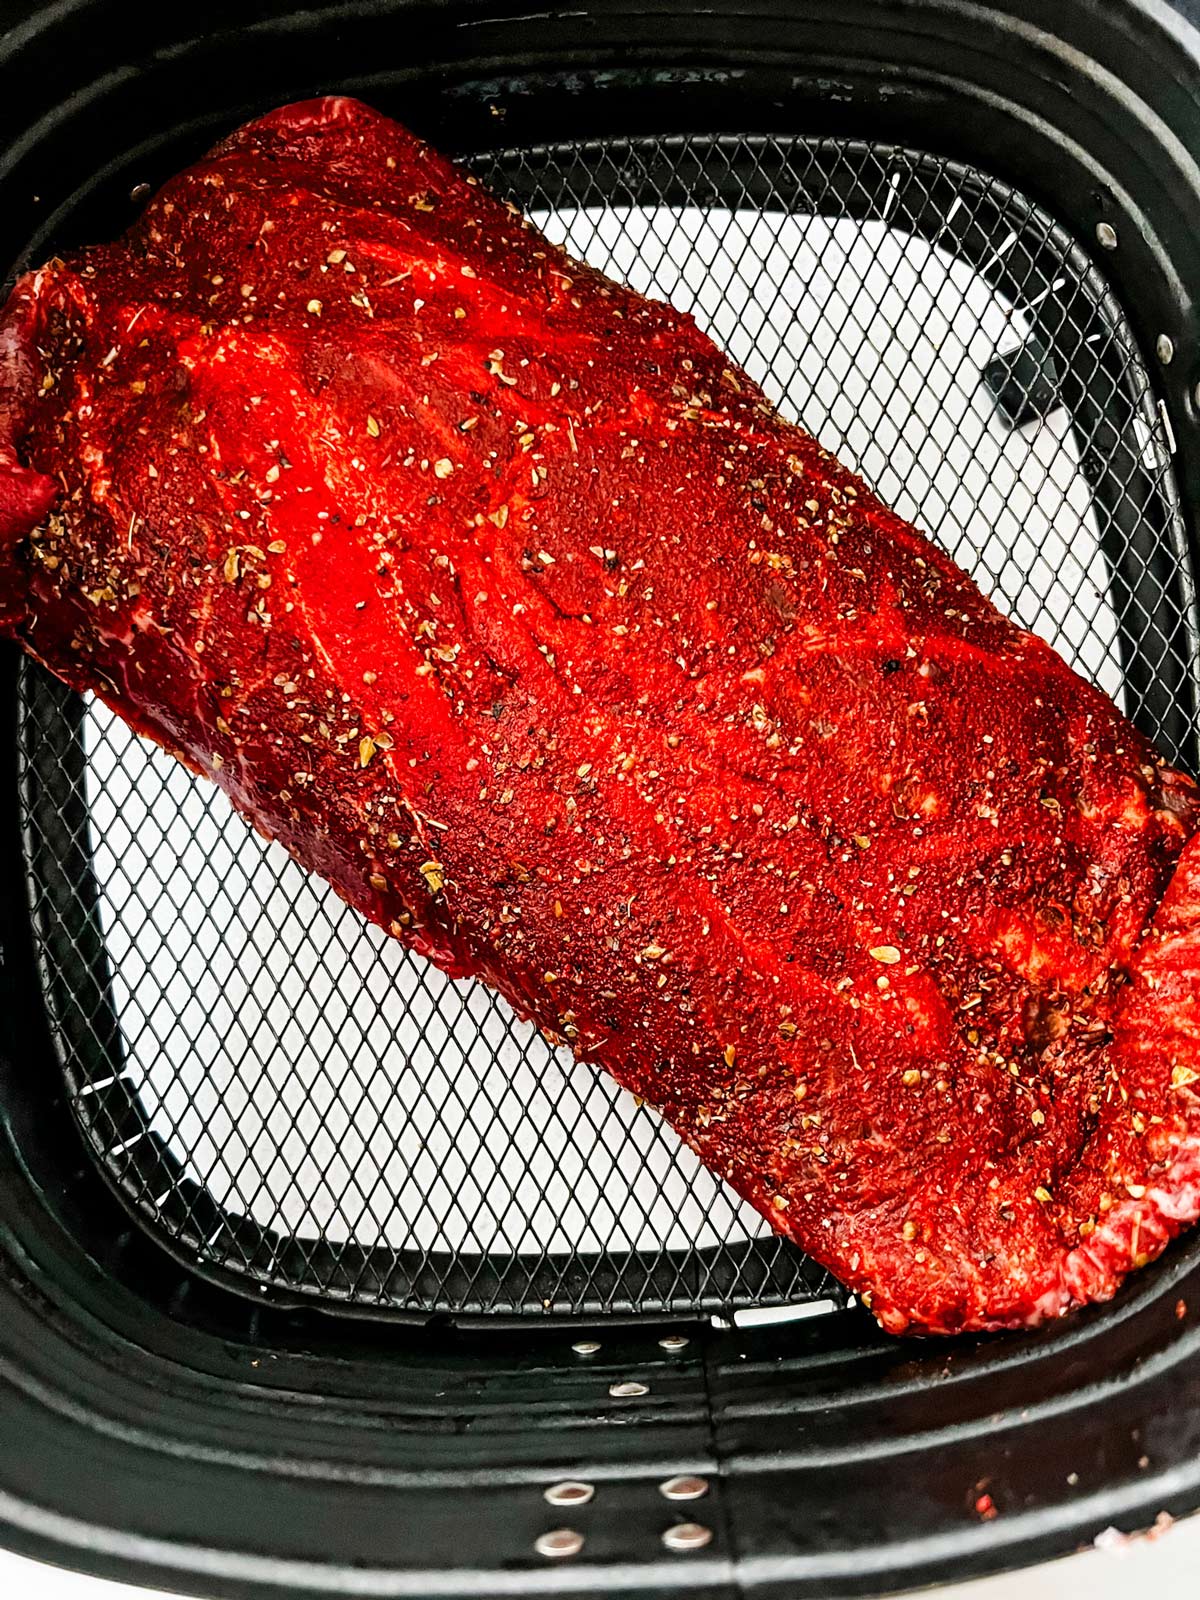 Flat iron steak in an air fryer basket ready to cook.